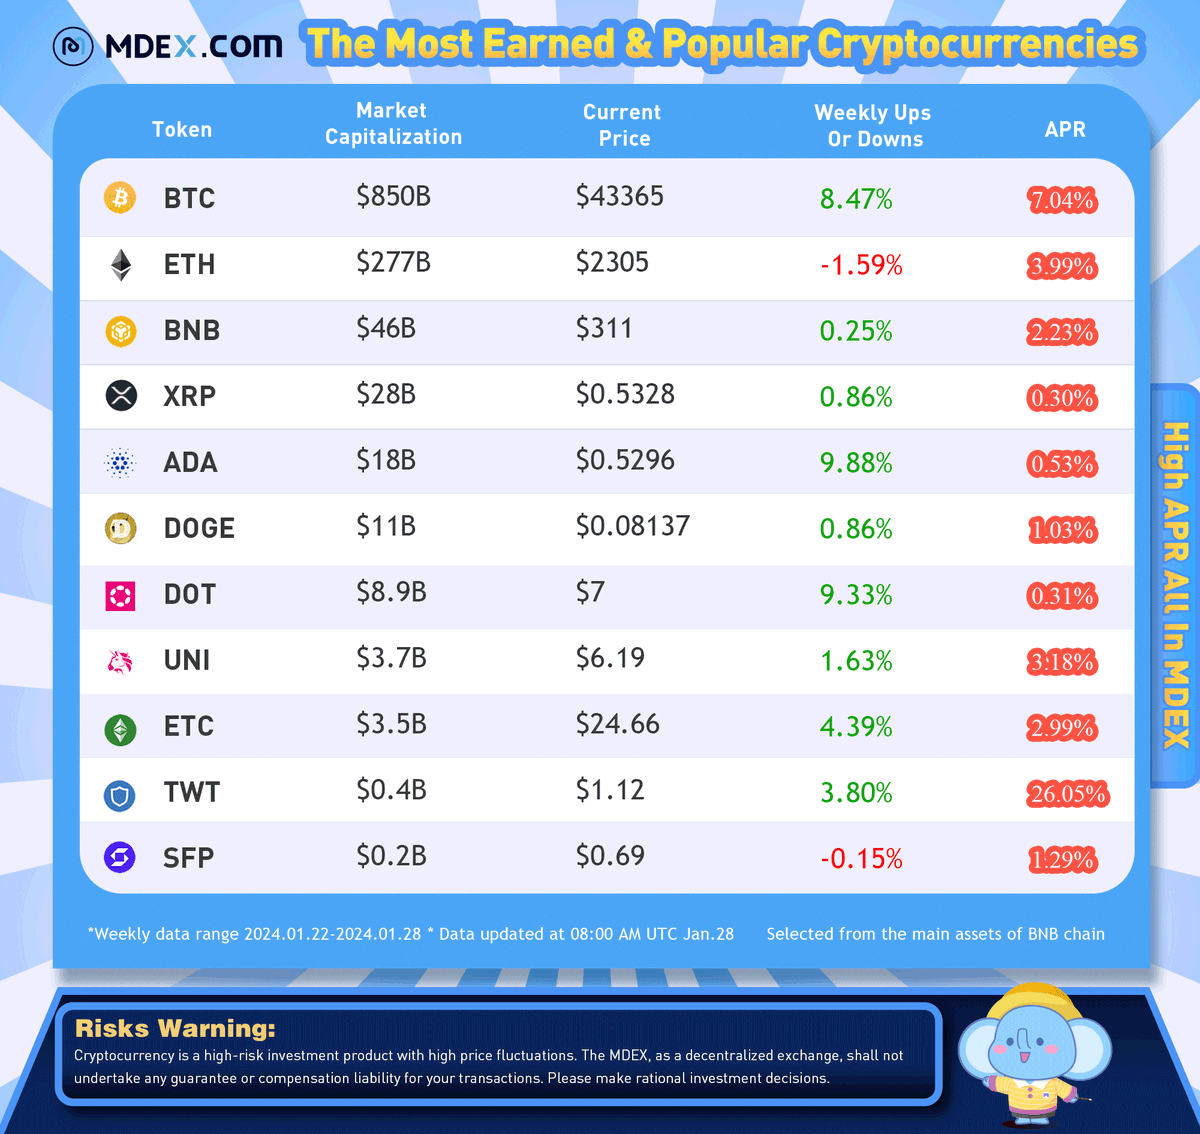 📈Check out the 'Most Earned & Popular Major #Cryptocurrencies Ranking' with the highest #APR on MDEX.com on #BNBChain from Jan 22-Jan 28. 💜Stay tuned to @Mdextech for more updates on HIGH APR #Cryptocurrencies. #BTC #ETH #BNB #XRP $tip #USTC